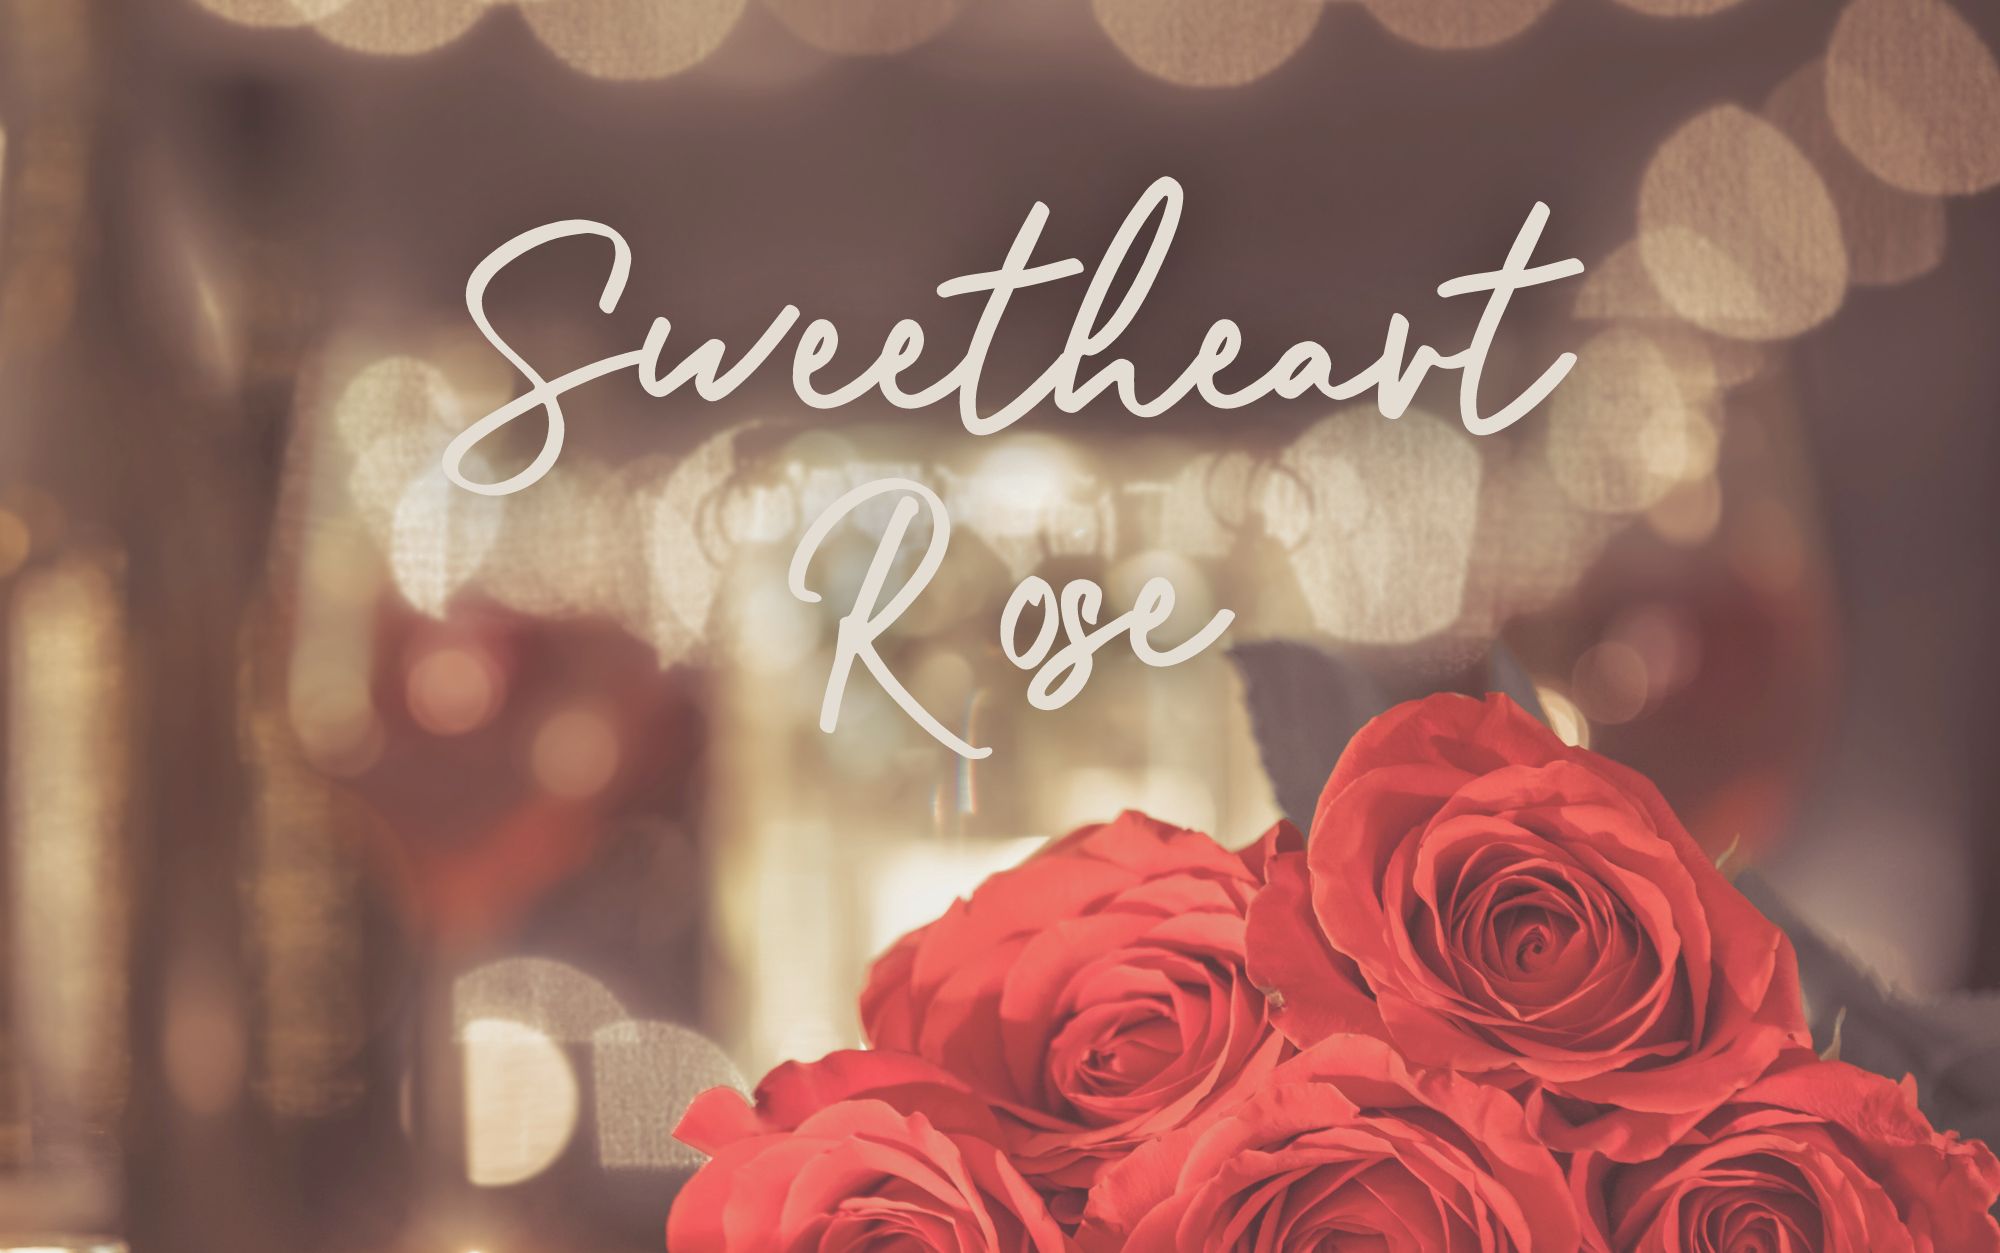 An image attempting to show that we have <b>Sweetheart Rose | $370</b>